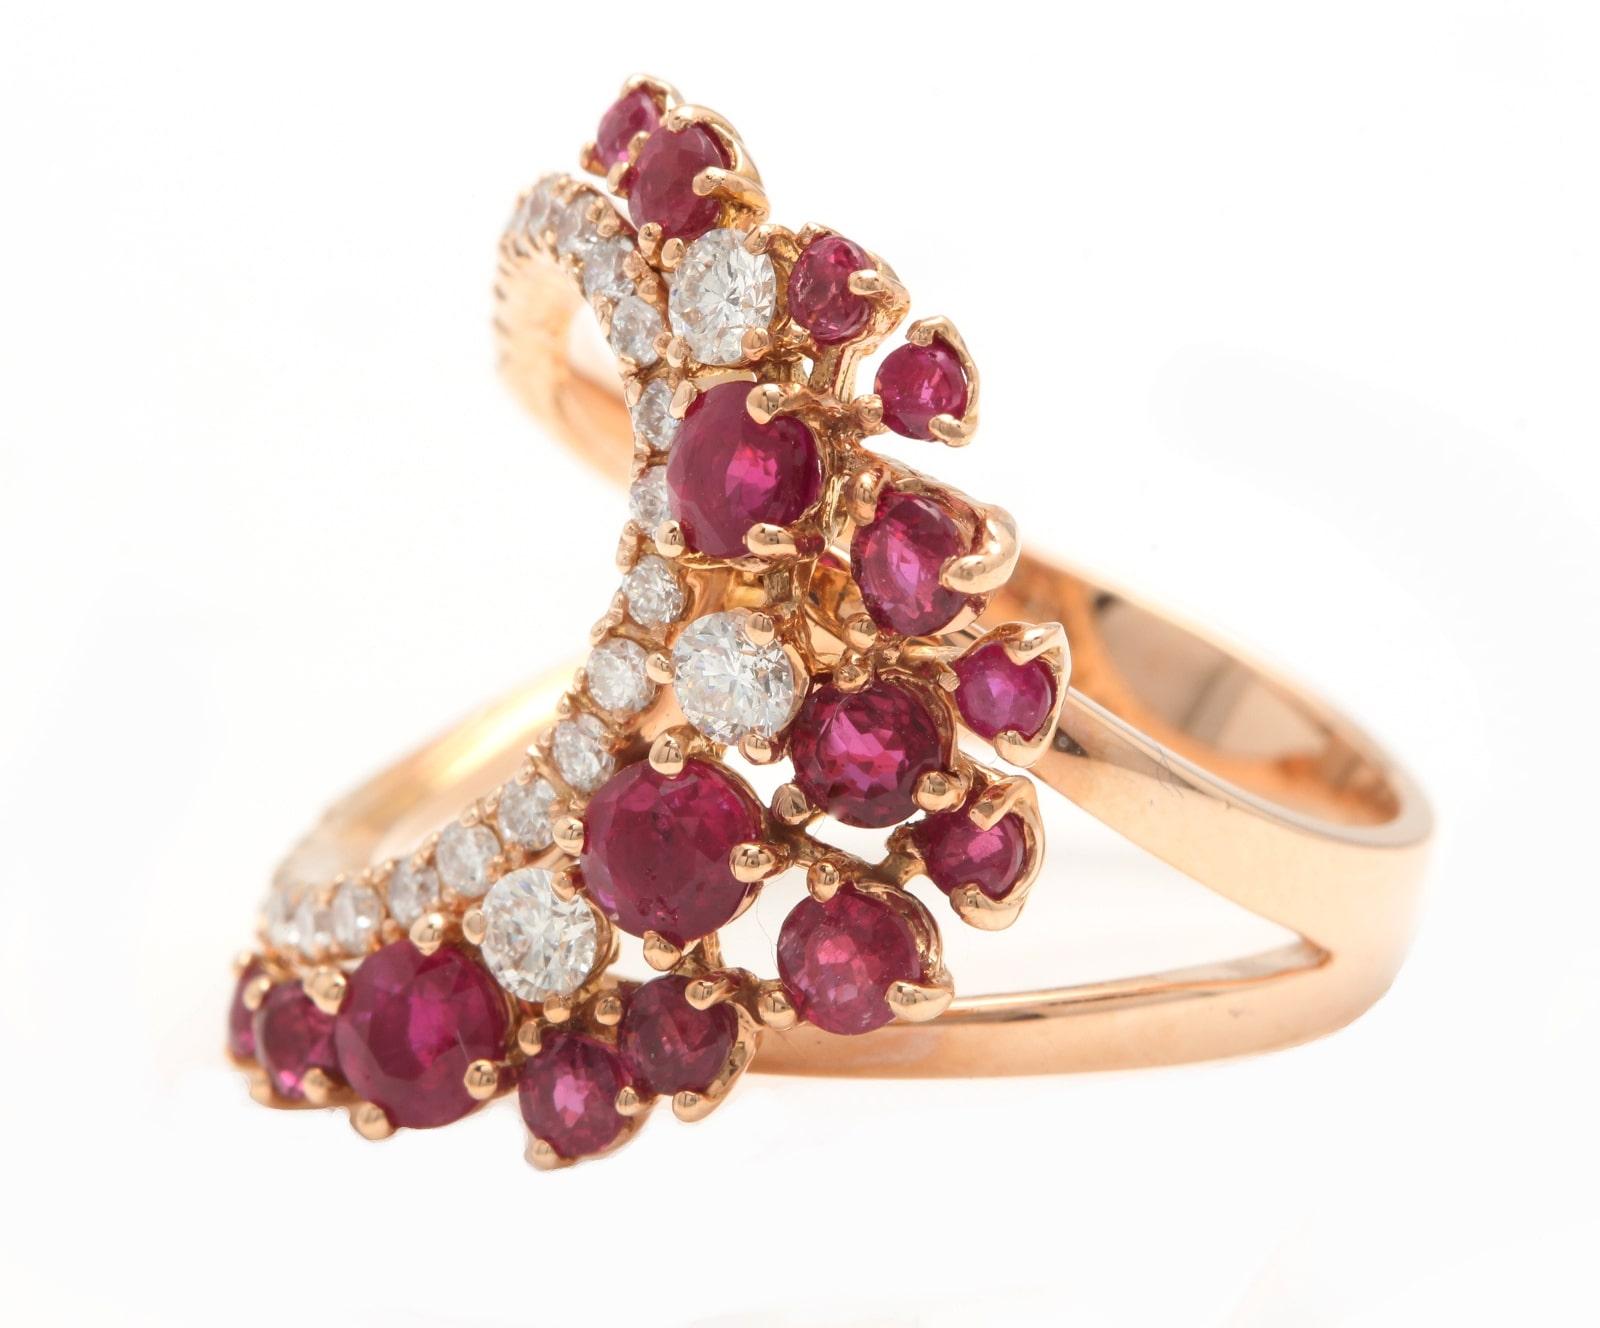 Impressive 1.80Ct Natural Ruby and Natural Diamond 14K Rose Gold Ring

Suggested Replacement Value: Approx. $5,000.00

Ruby Treatment: Heat

Total Round Ruby Weight is: Approx. 1.40ct

Natural Round Diamonds Weight: Approx. 0.40 Carats (color G-H /